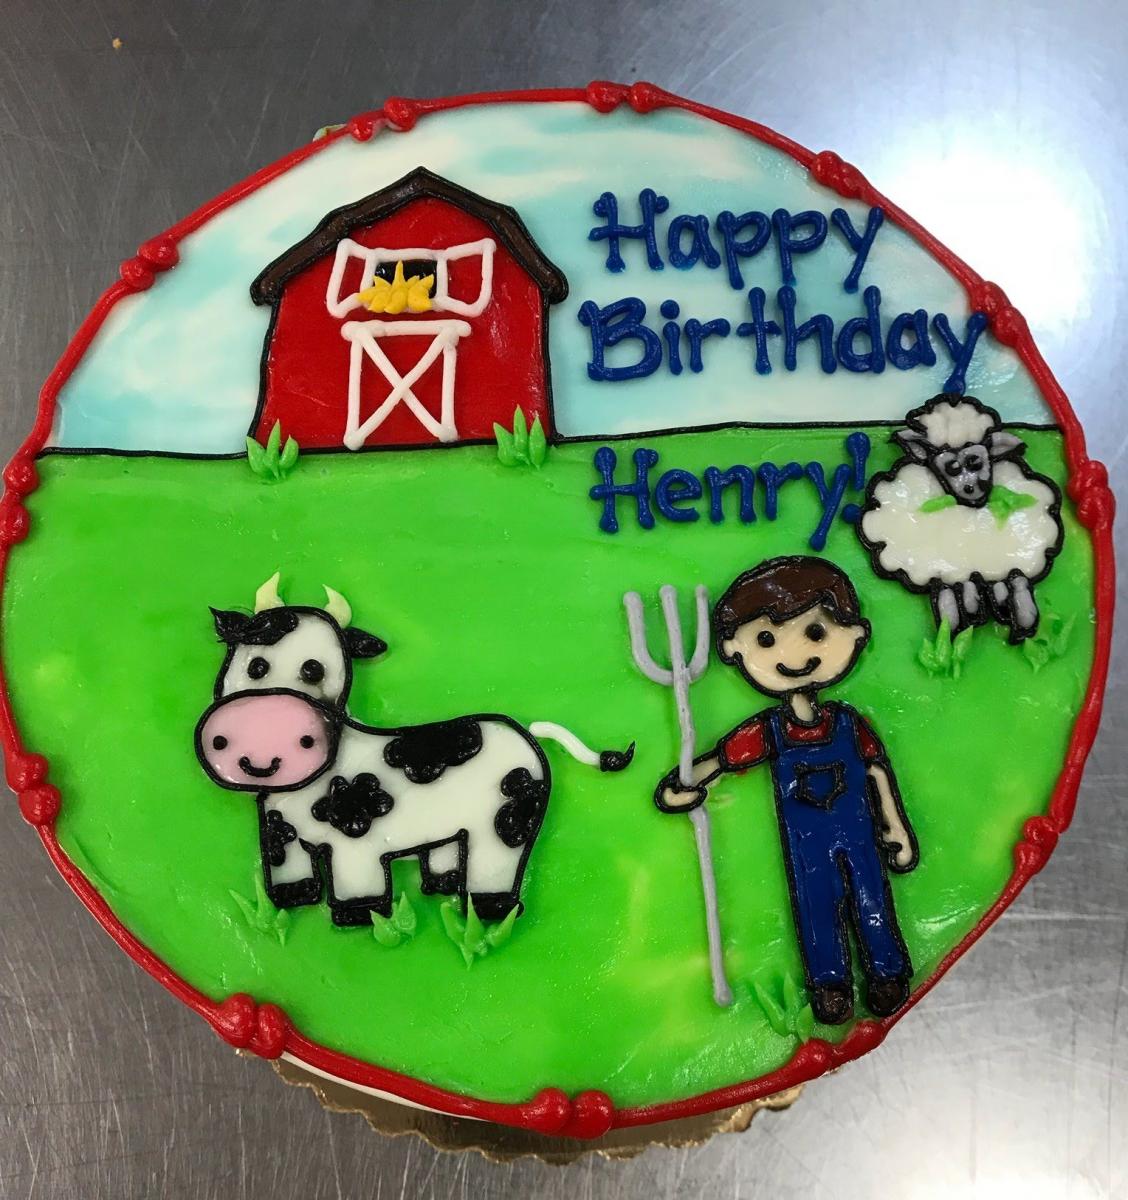 FARMER COW AND SHEEP WITH BARN AND GREEN GRASS FOR KIDS BIRTHDAY PARTY CELEBRATION CAKE IN CHICAGO